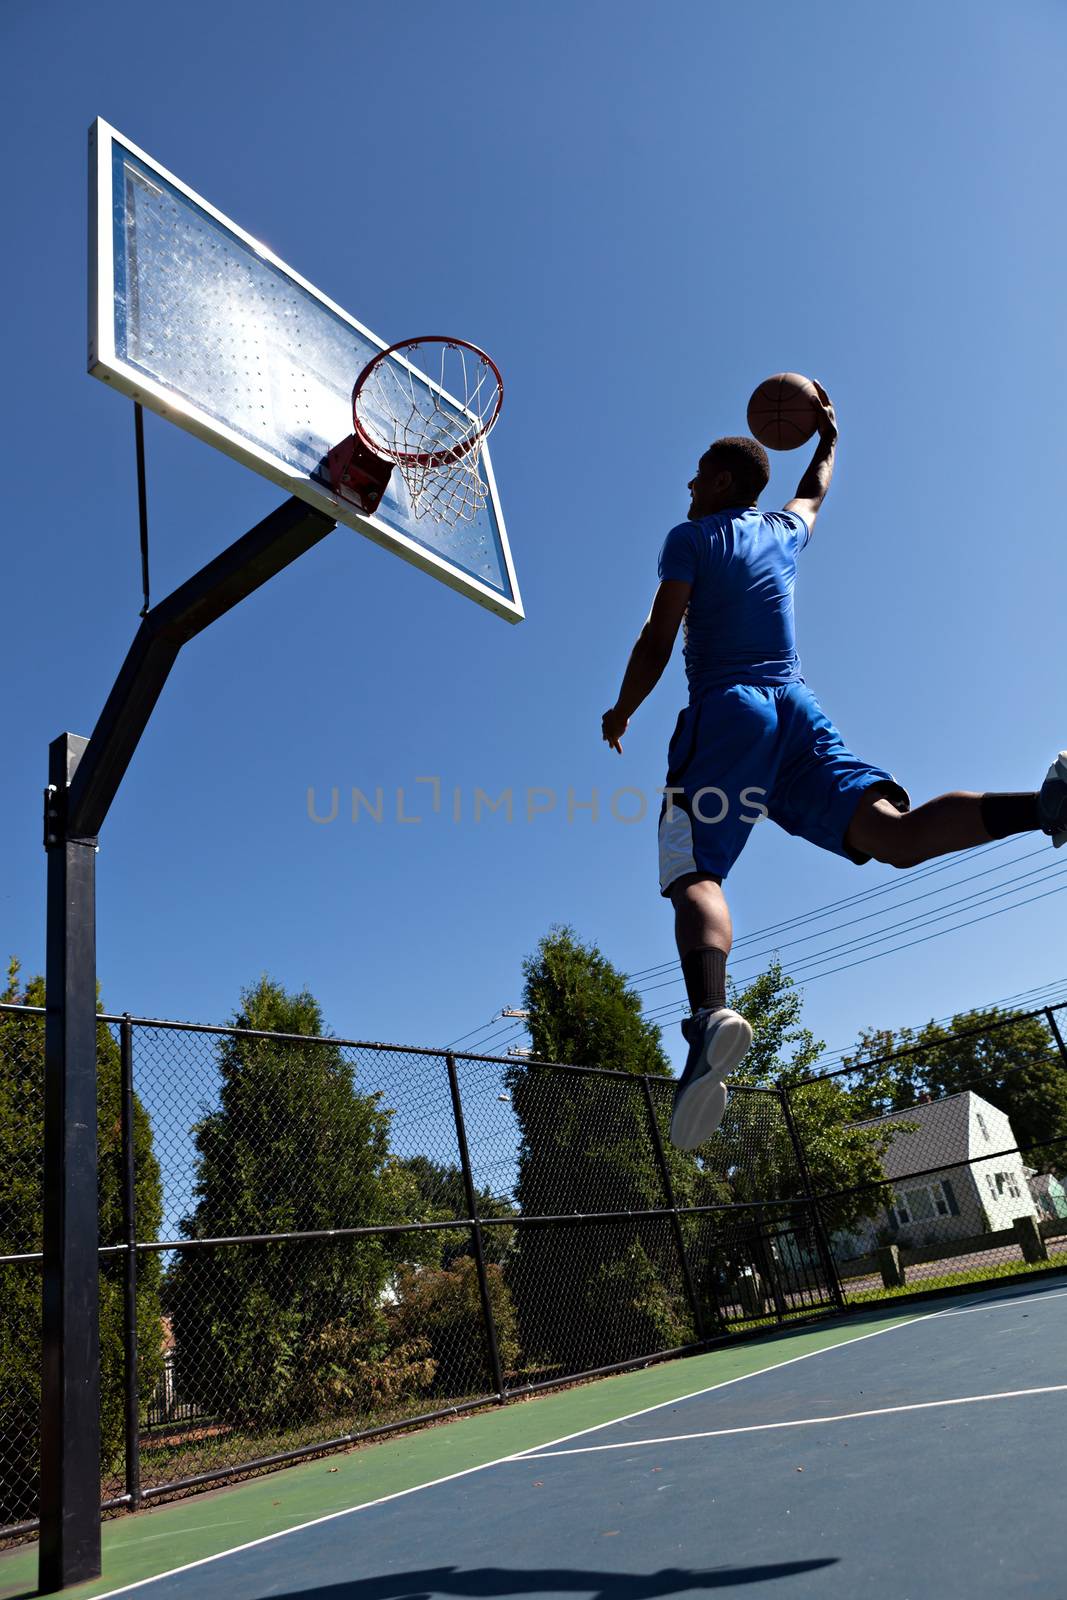 A young athlete flying through the air to dunk the ball into the basket.